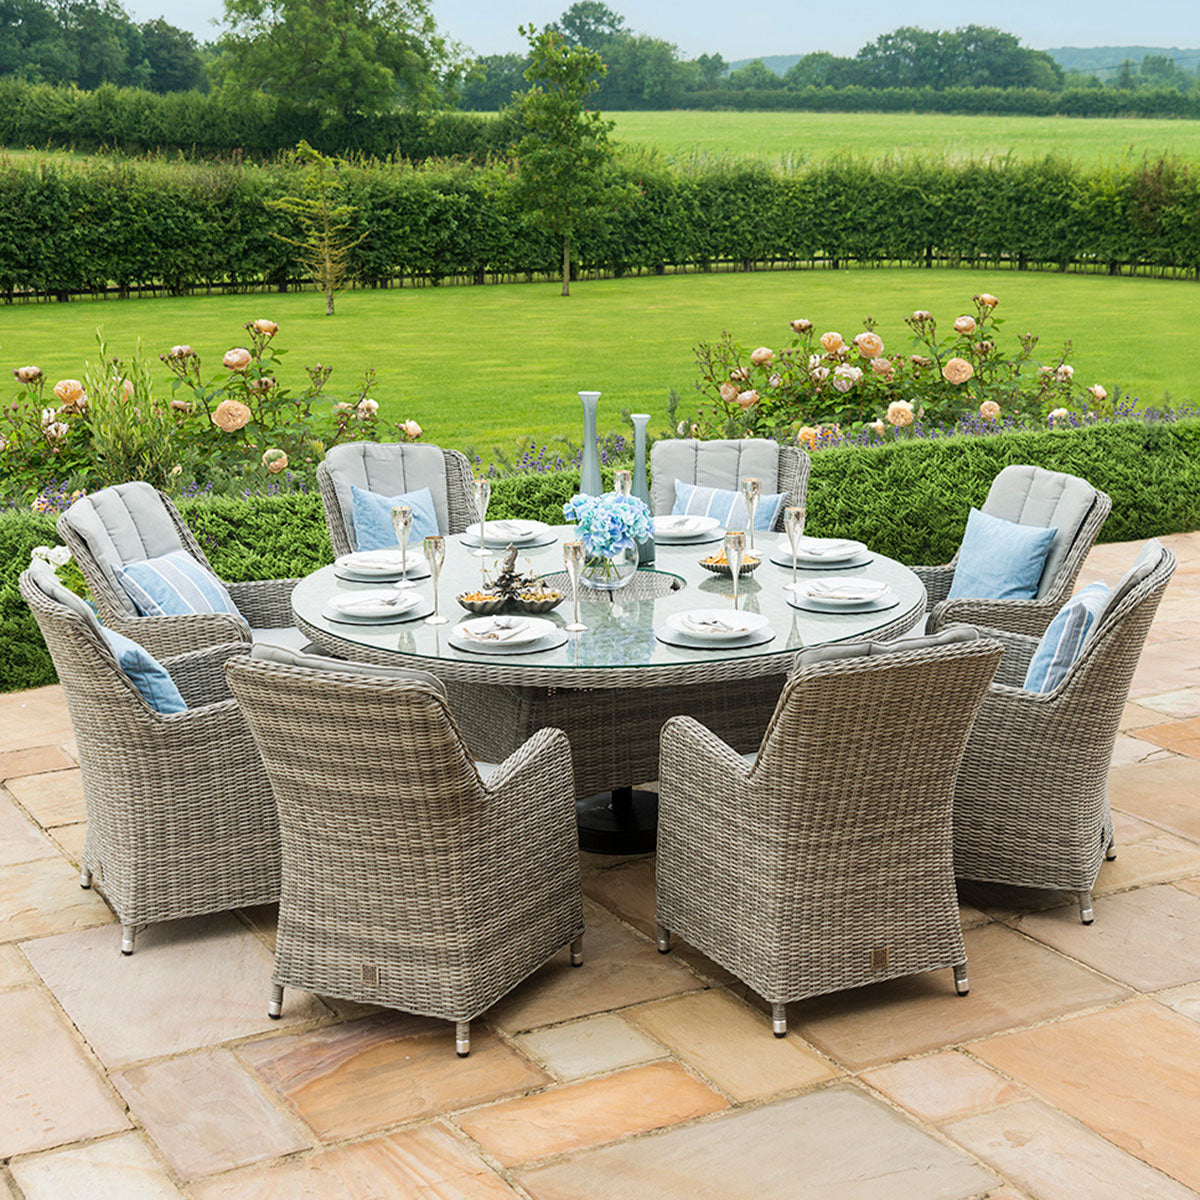 Light grey rattan 8 seat round ice bucket dining set with Venice chairs